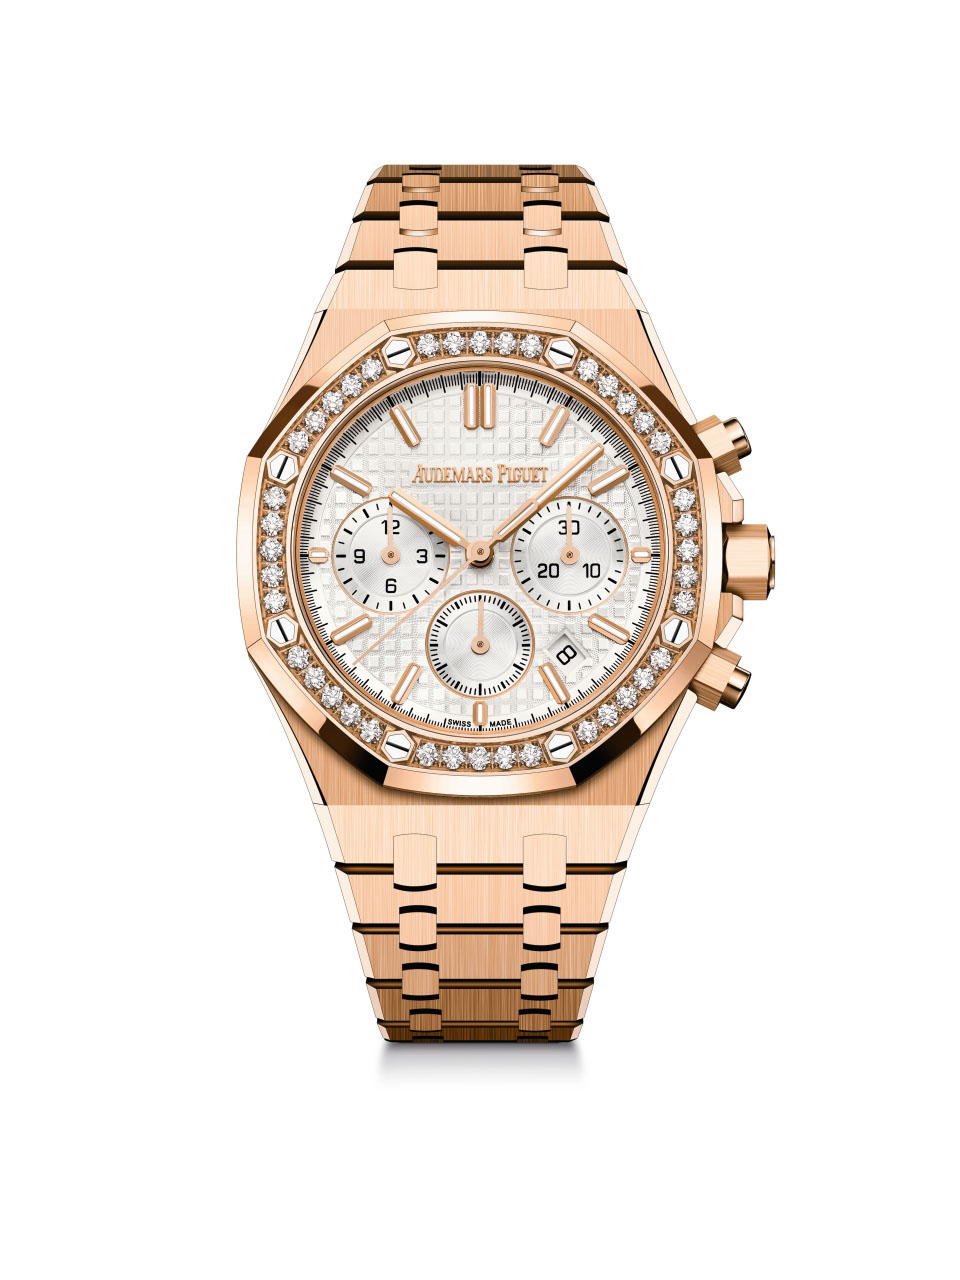 Royal Oak Selfwinding Chronograph / 38mm; 18-carat pink gold case, bezel set with 40 brilliant-cut diamonds (~0.92 carats) with silver-toned dial (26715OR.ZZ.1356OR.01)